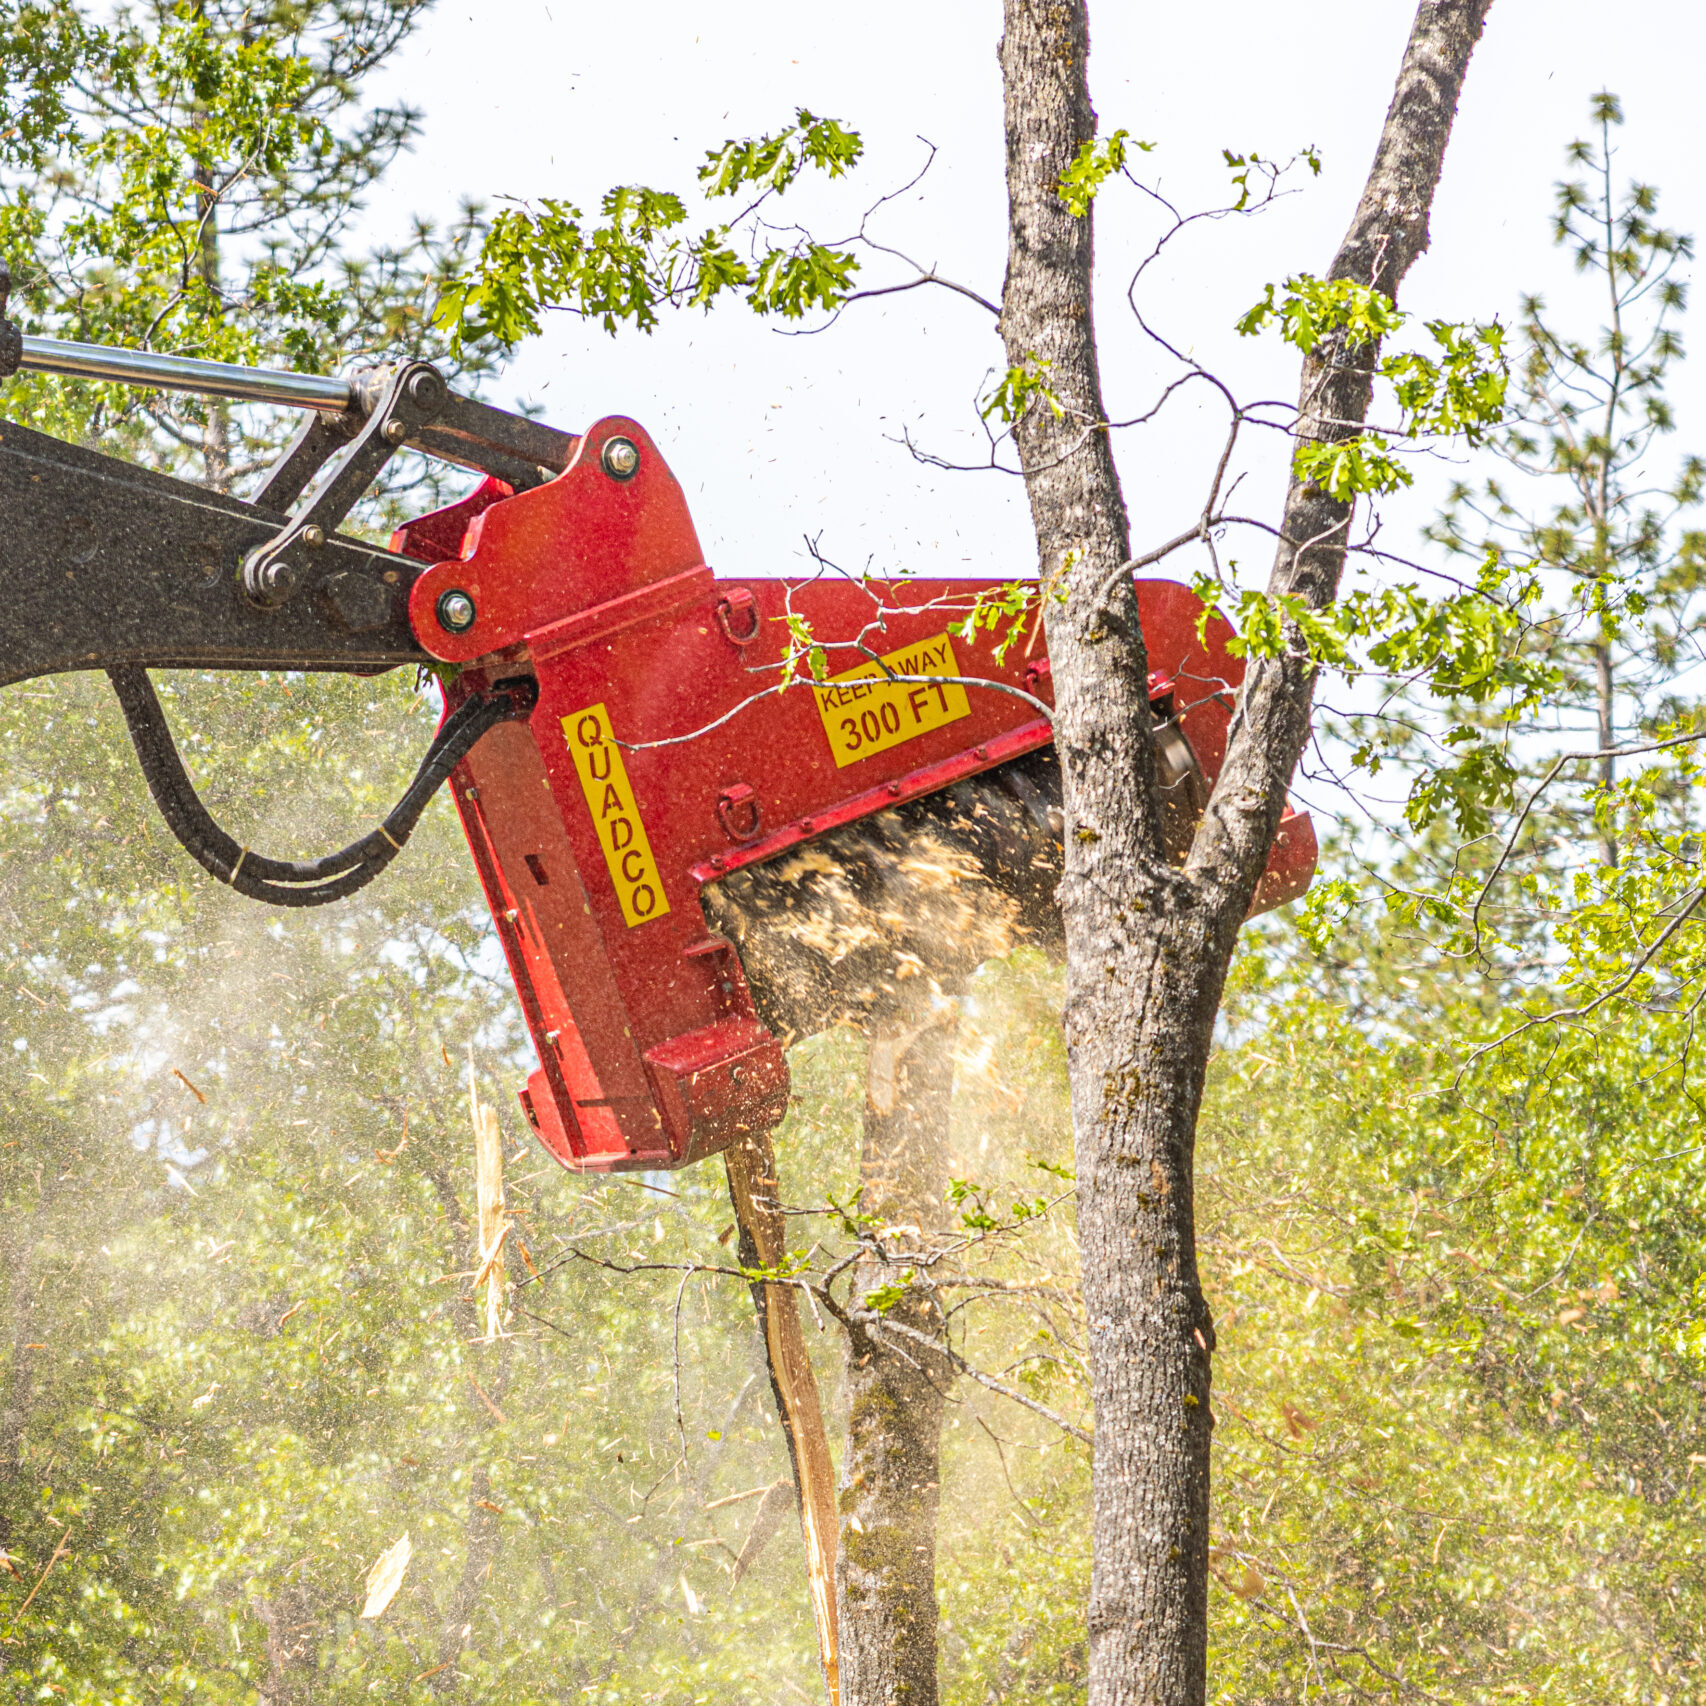 Quadco 56QDM grinding a tree in a forest